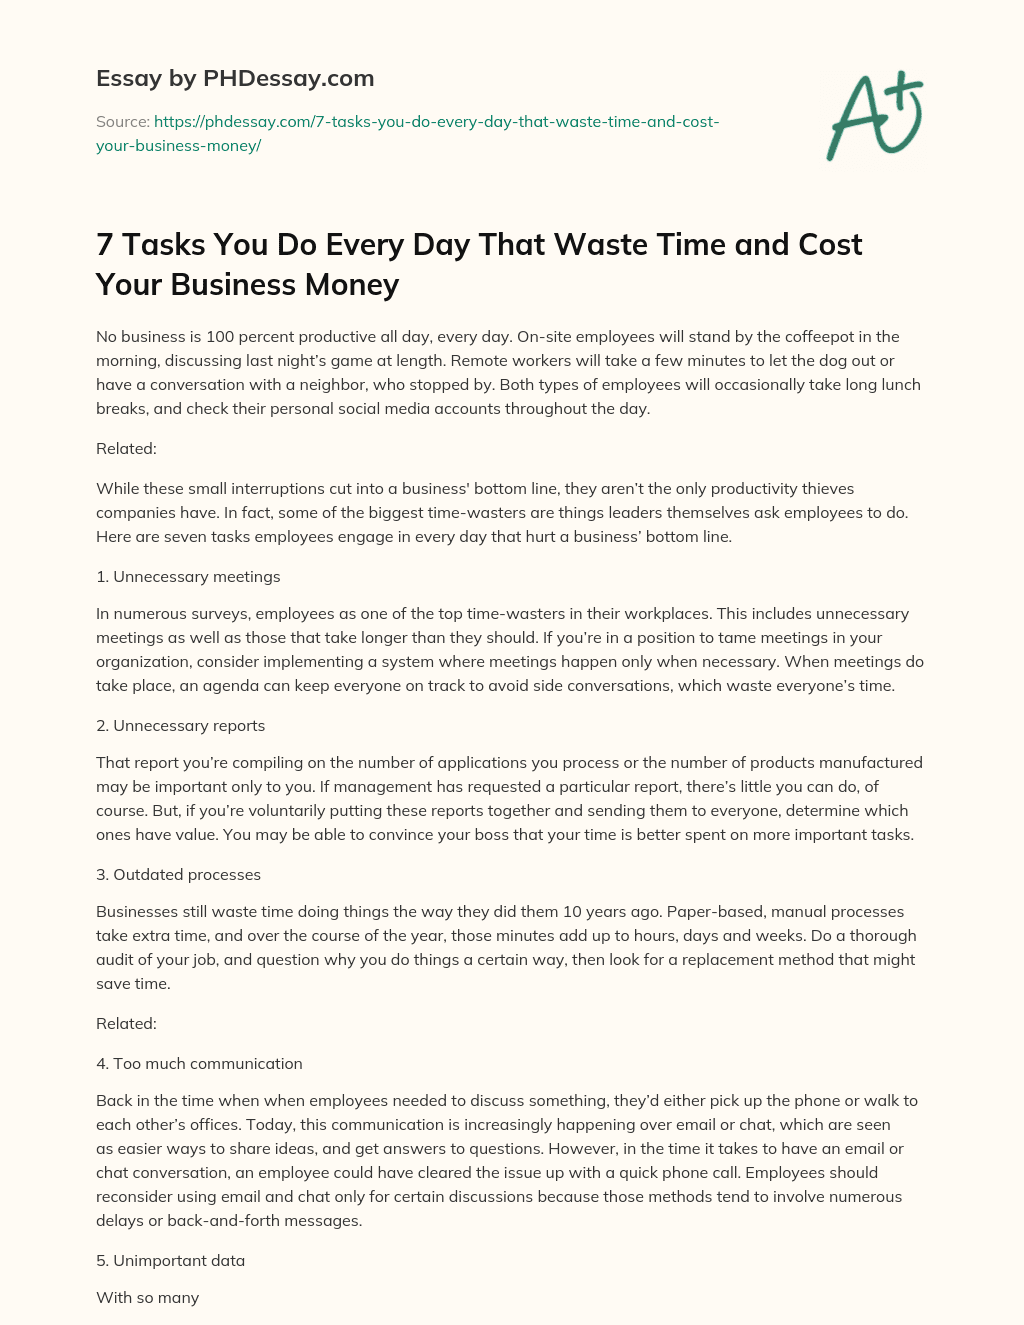 7 Tasks You Do Every Day That Waste Time and Cost Your Business Money essay